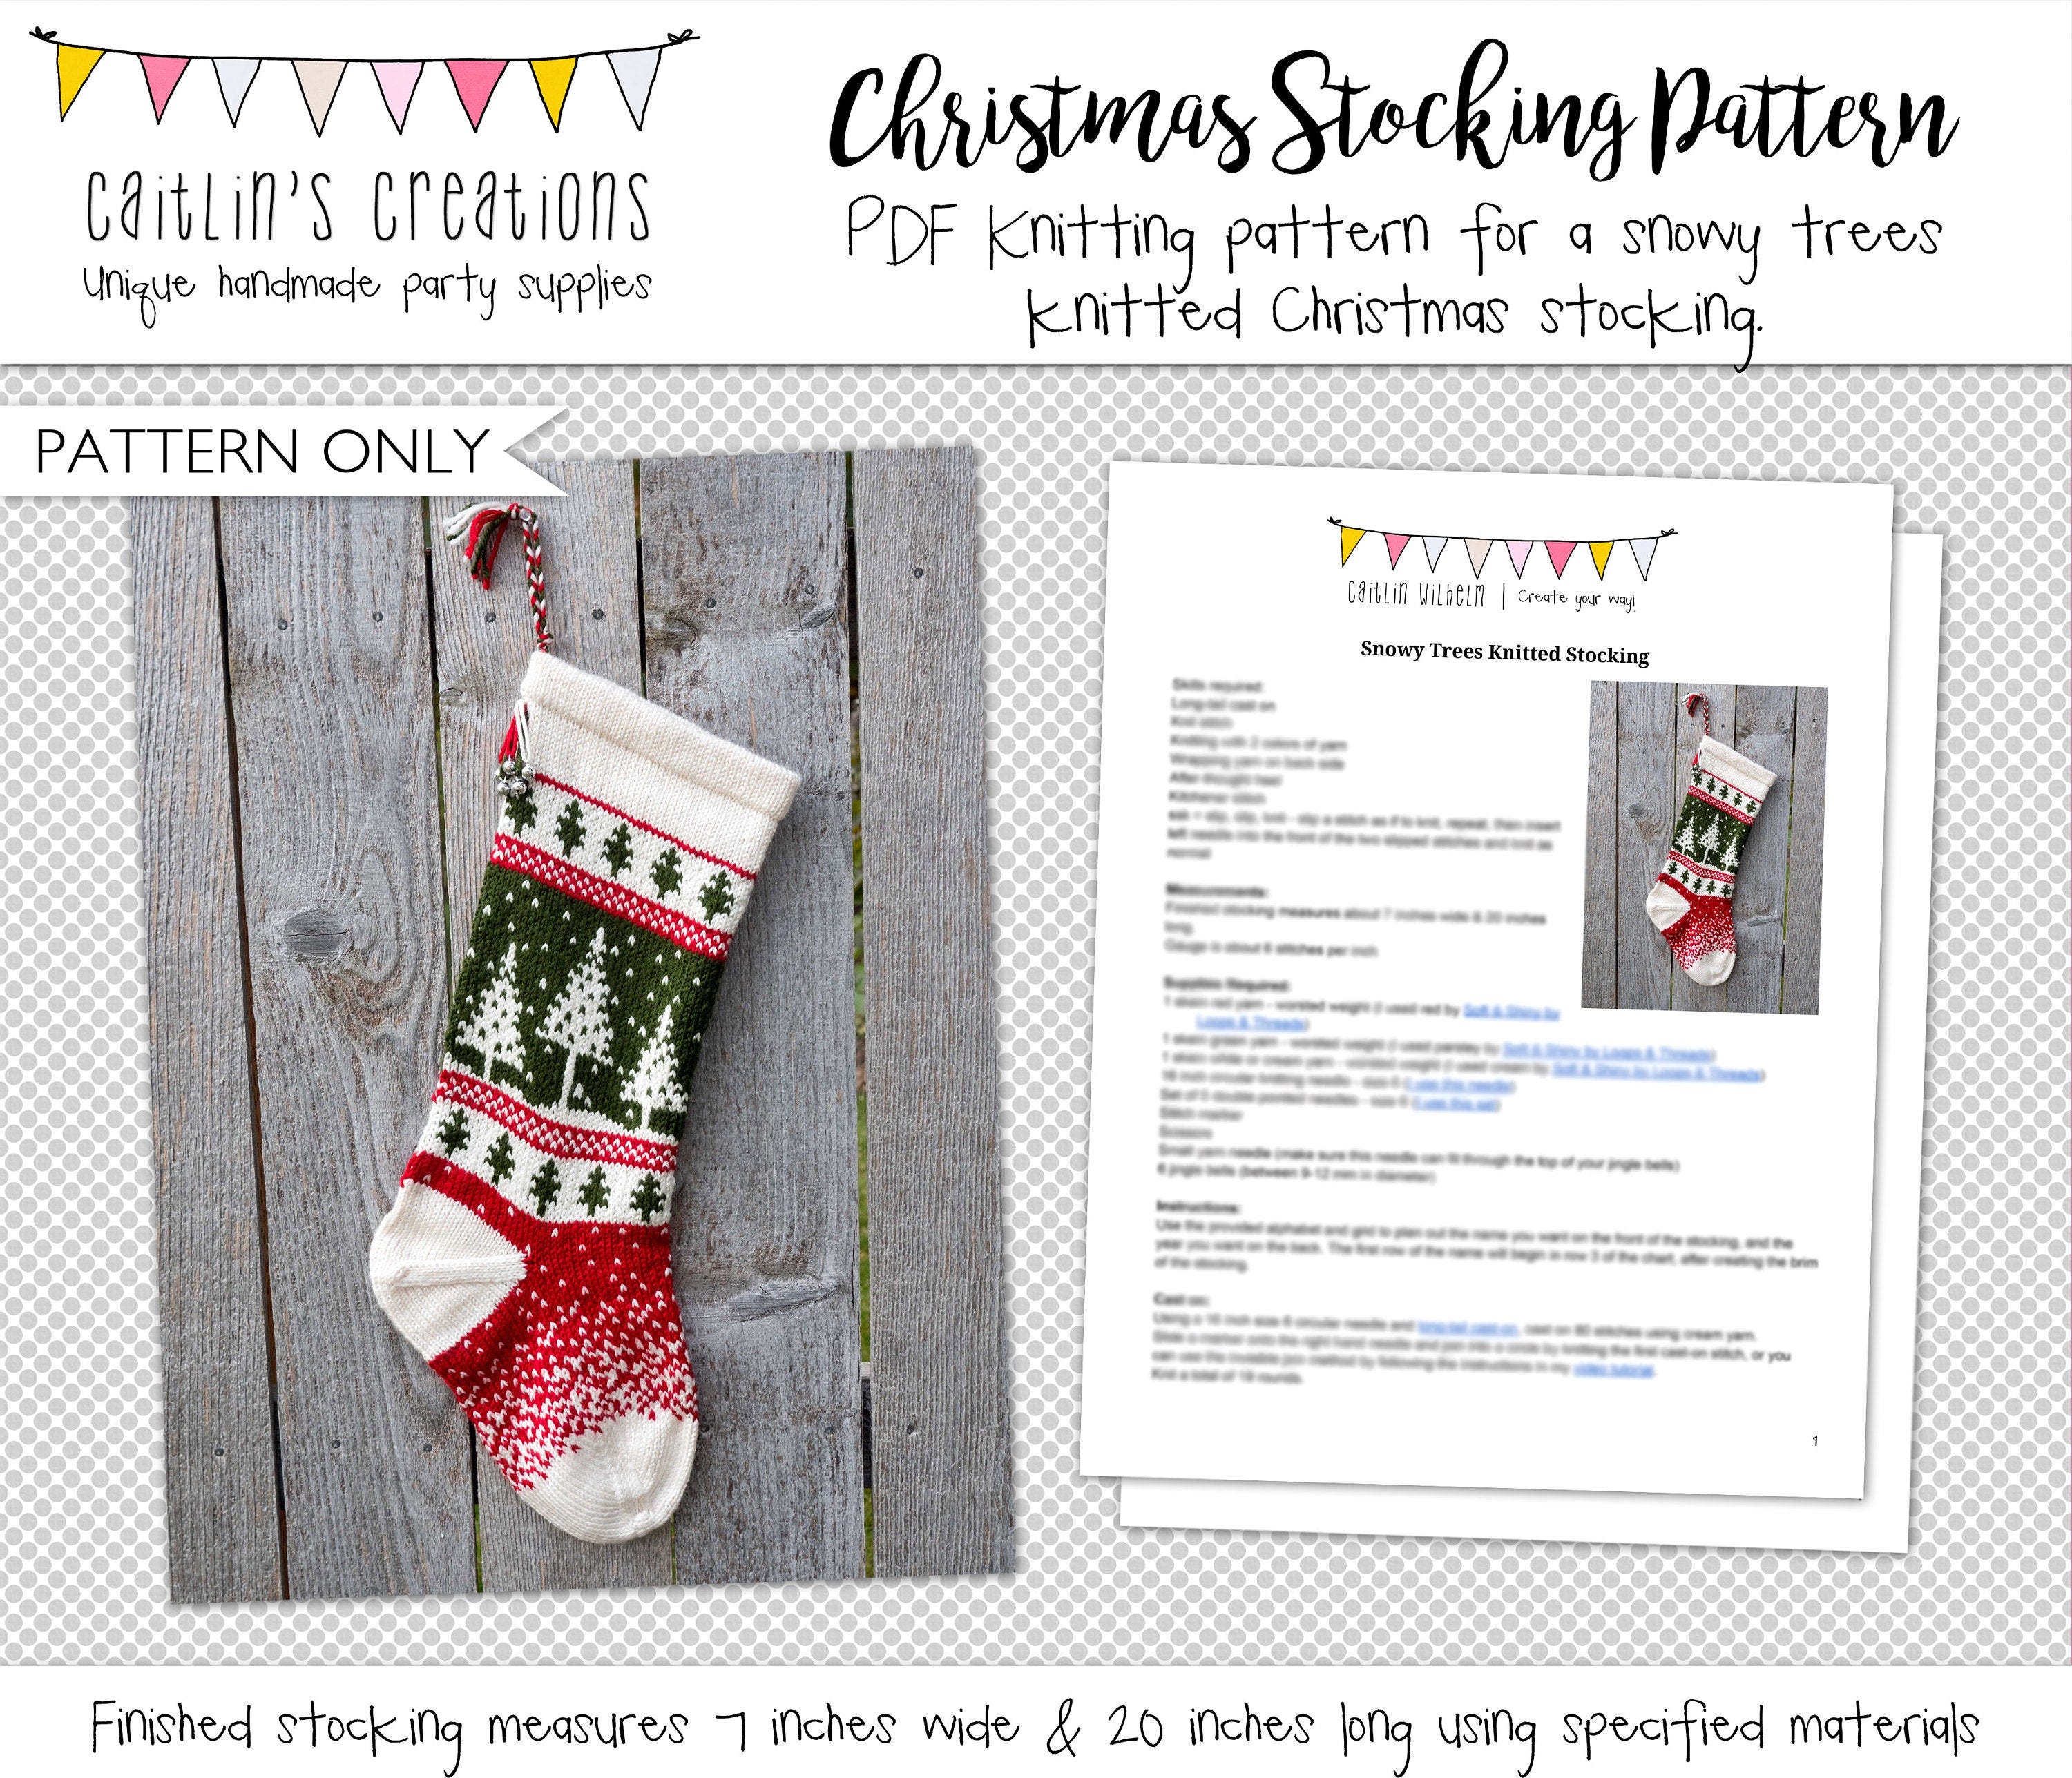 Digital Knitting Pattern | Snowy Trees | Knitted Christmas Stocking | Instant Download | Includes links to video tutorials